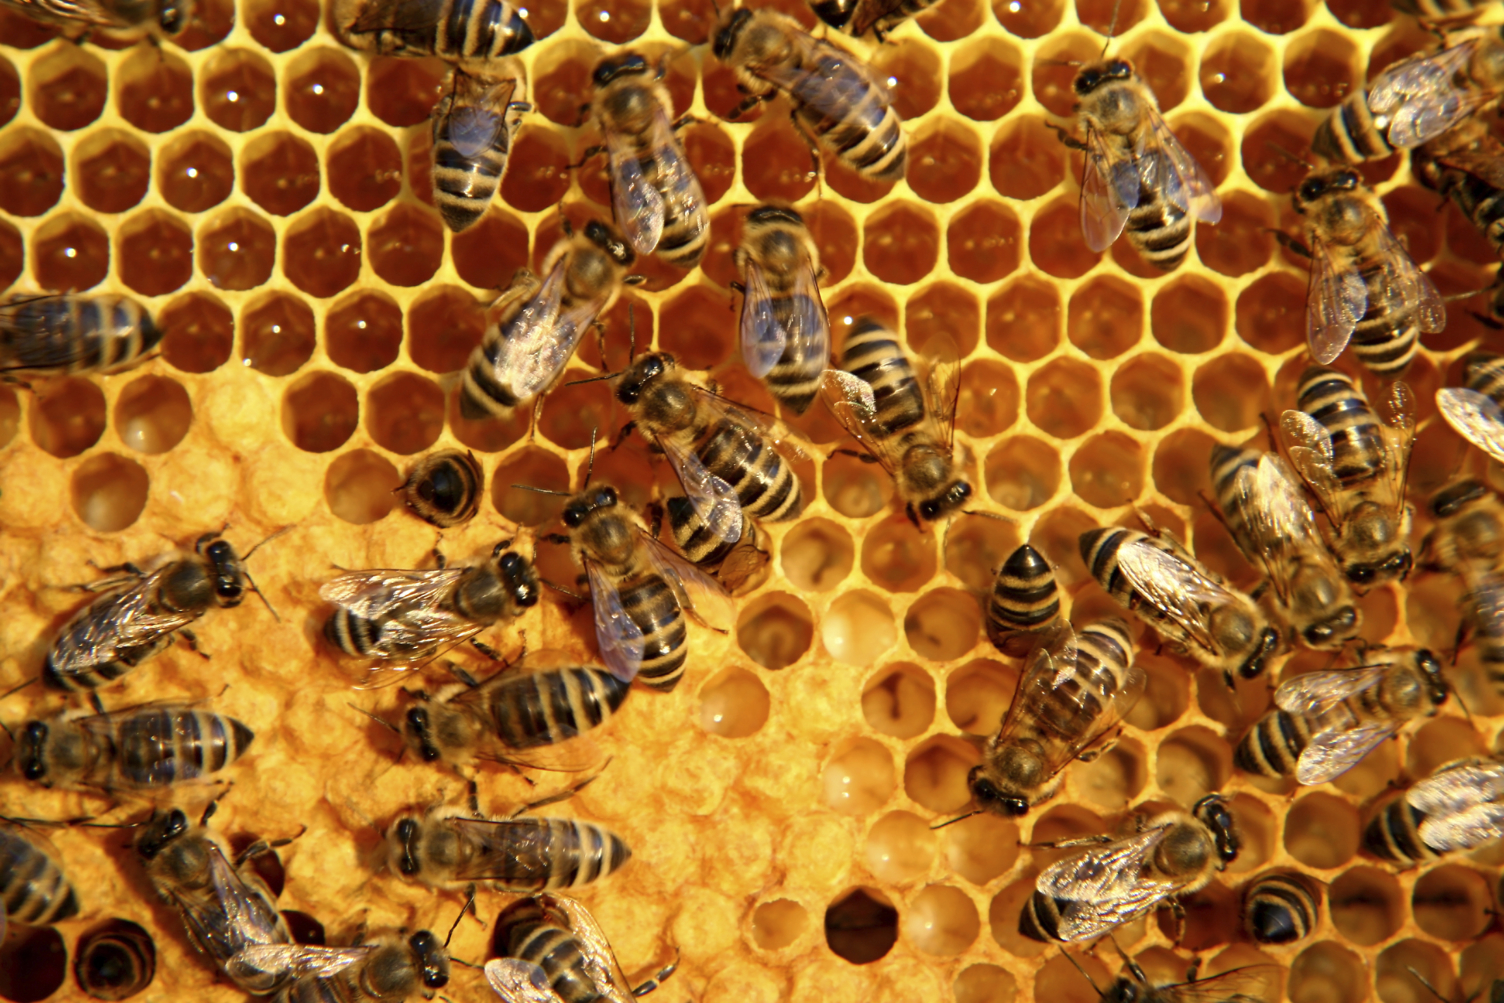 Apitherapy: The Many Benefits of Bee Products